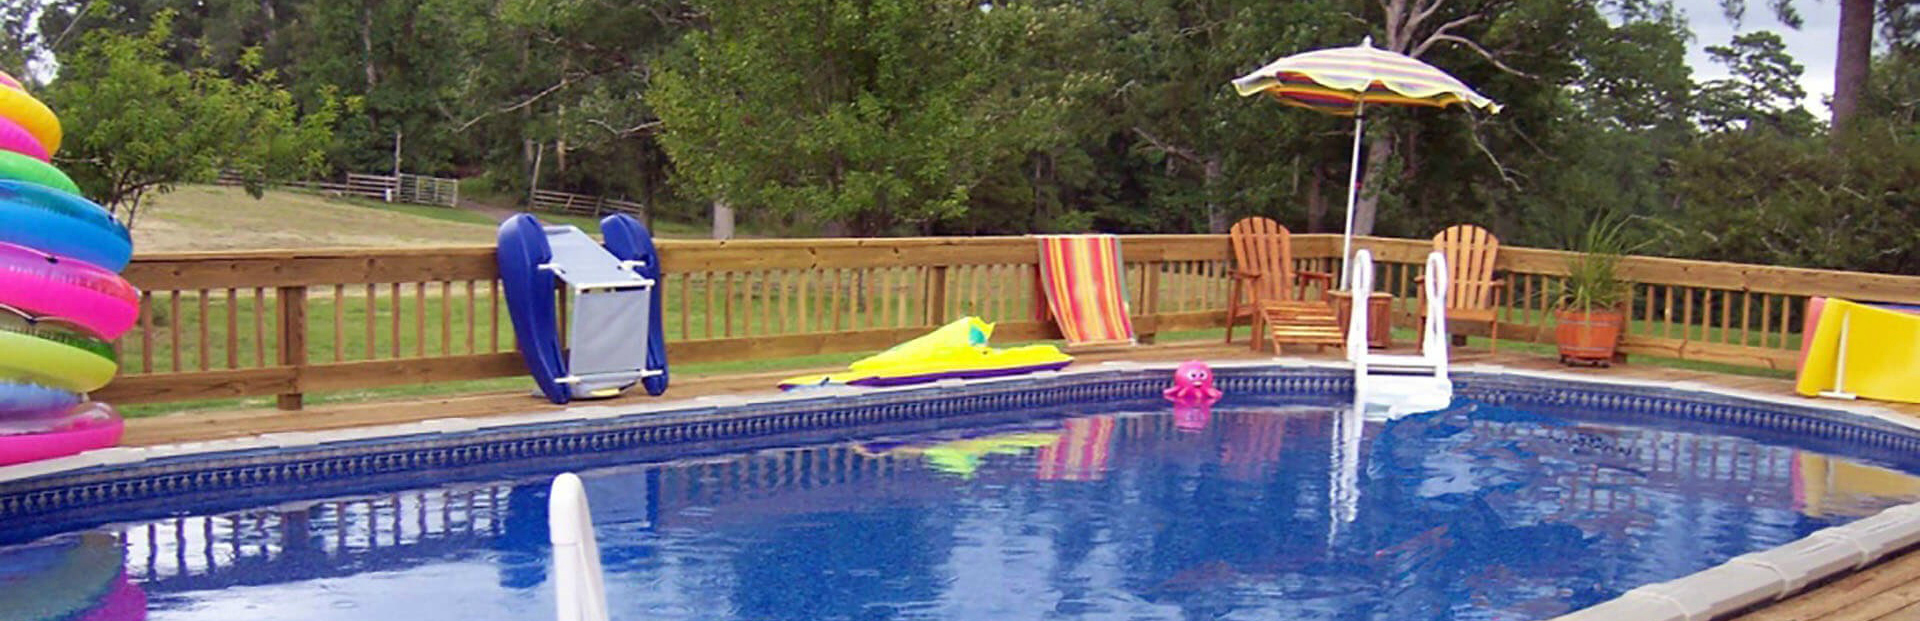 How Much Does an Above Ground Pool Cost?